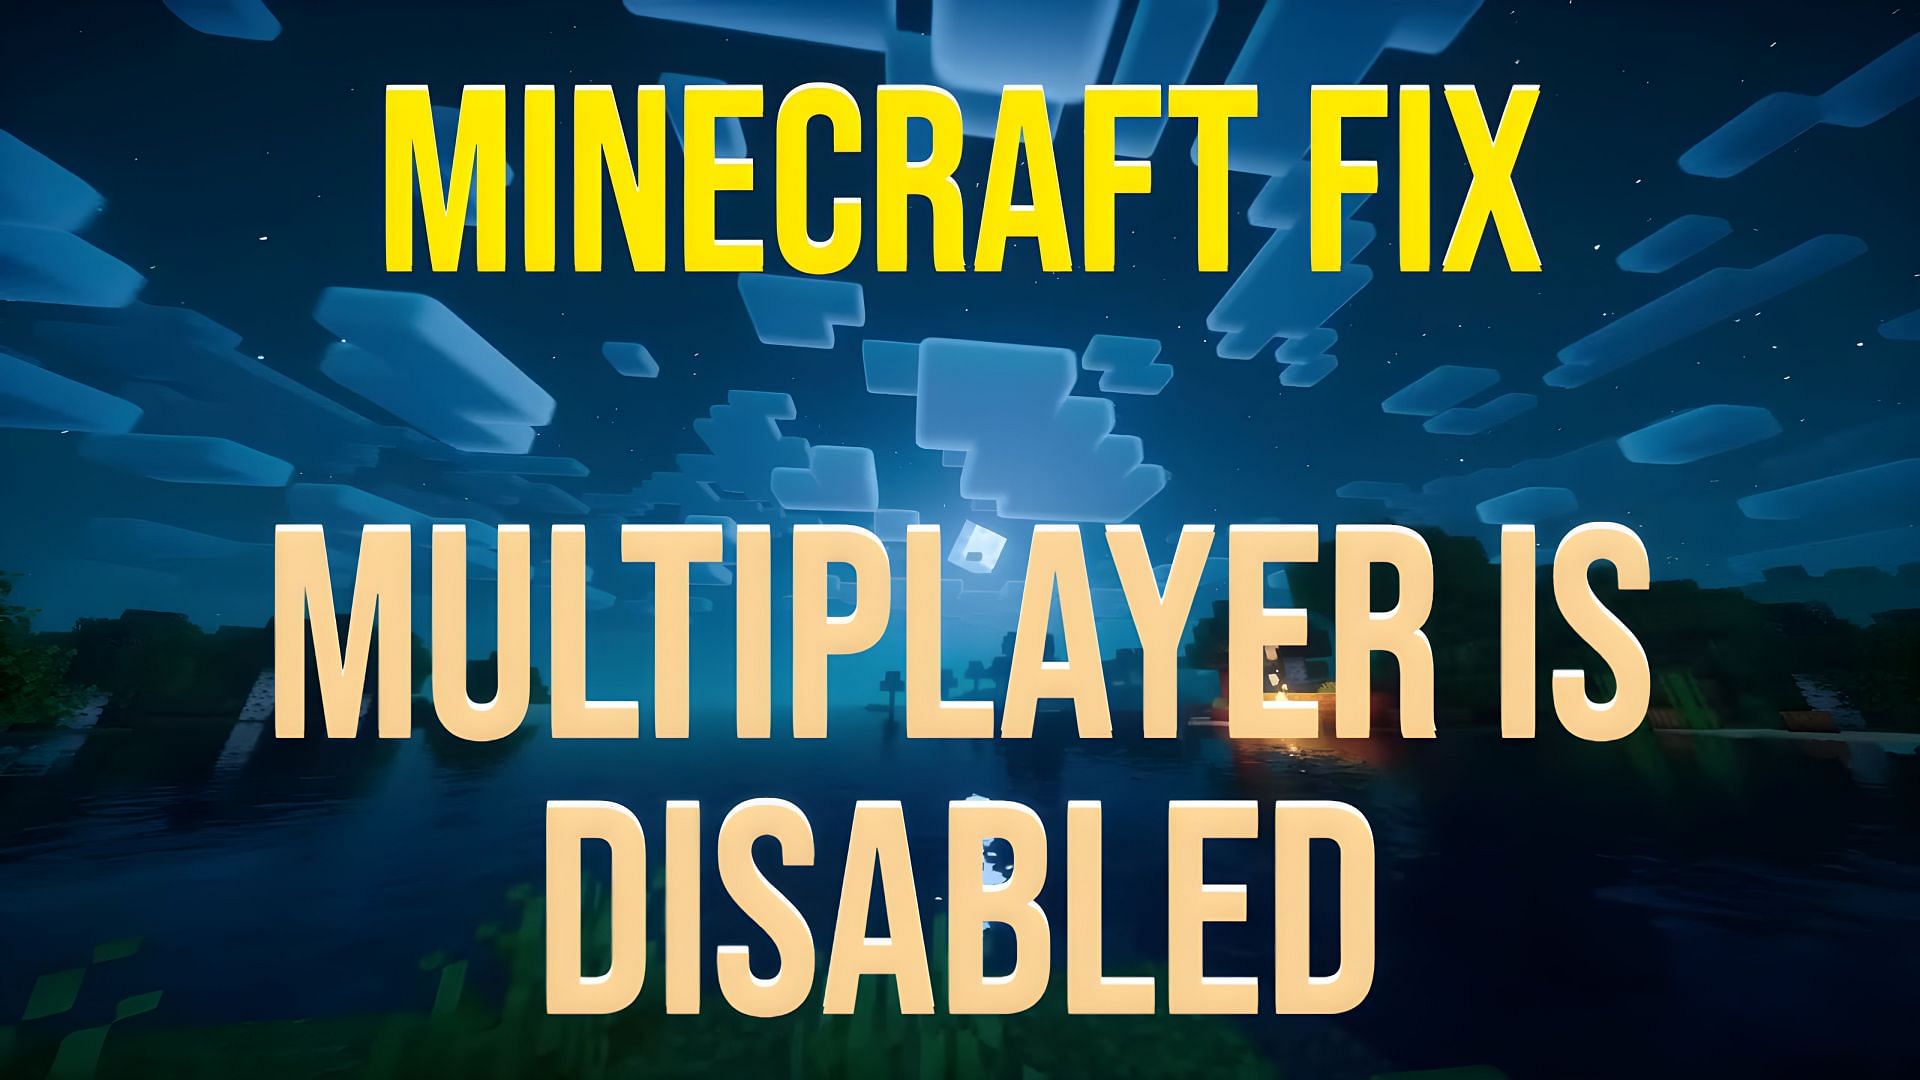 Minecraft errors can be fixed various ways (Image via Youtube/Chilled Fox)